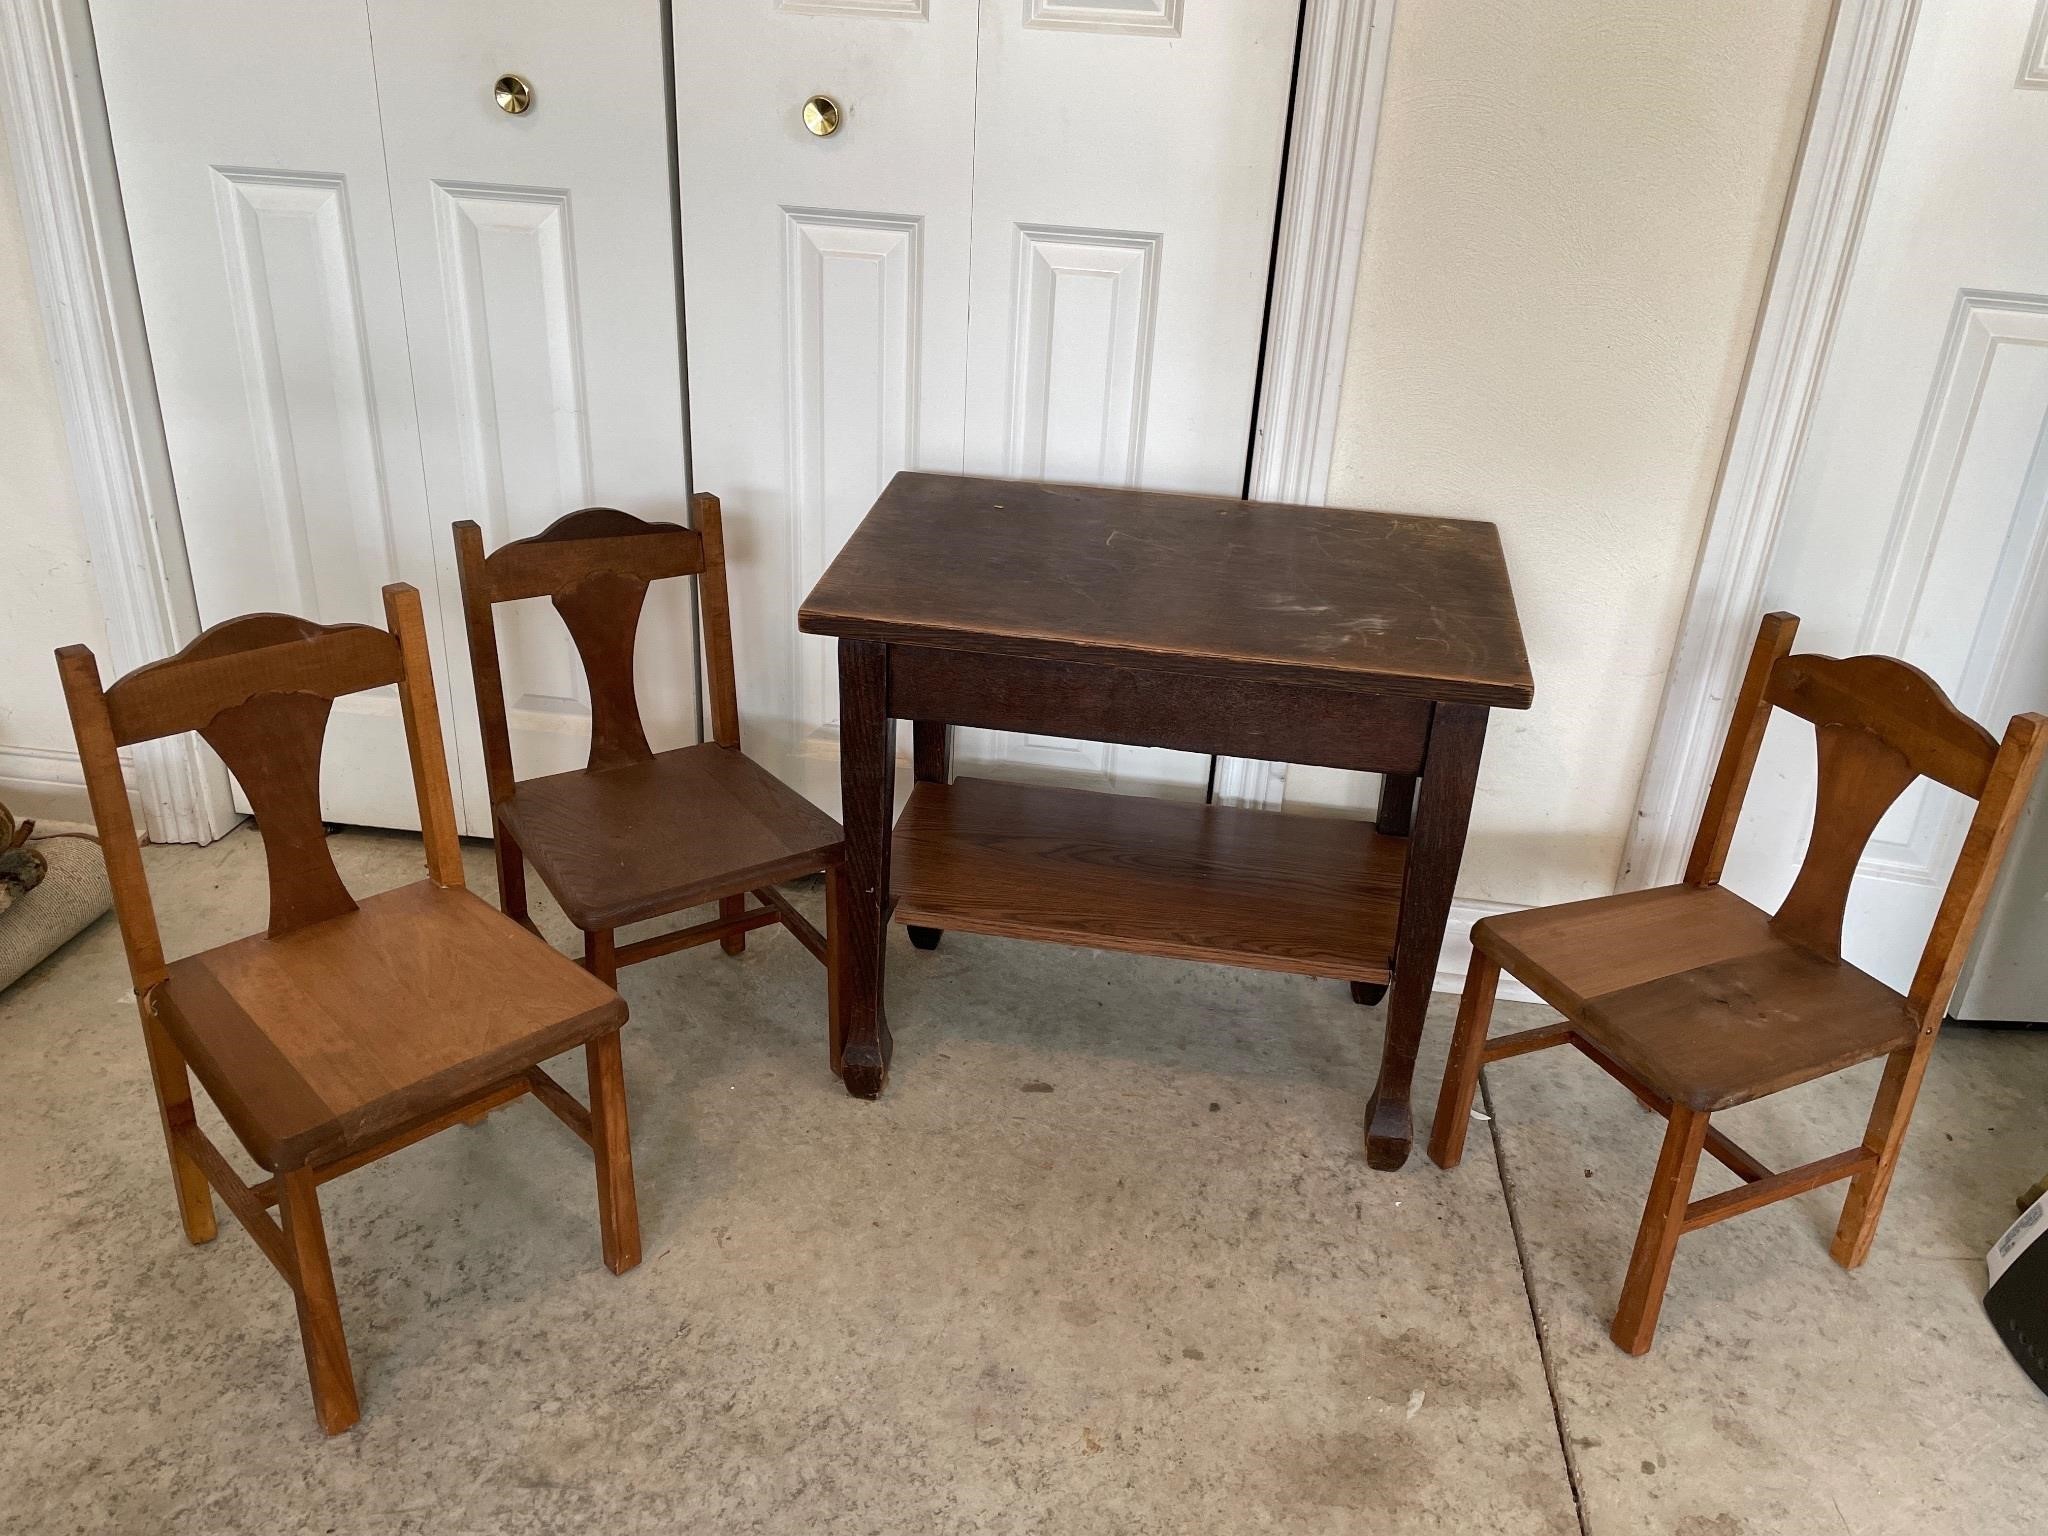 Antique children’s desk and 3 - chairs